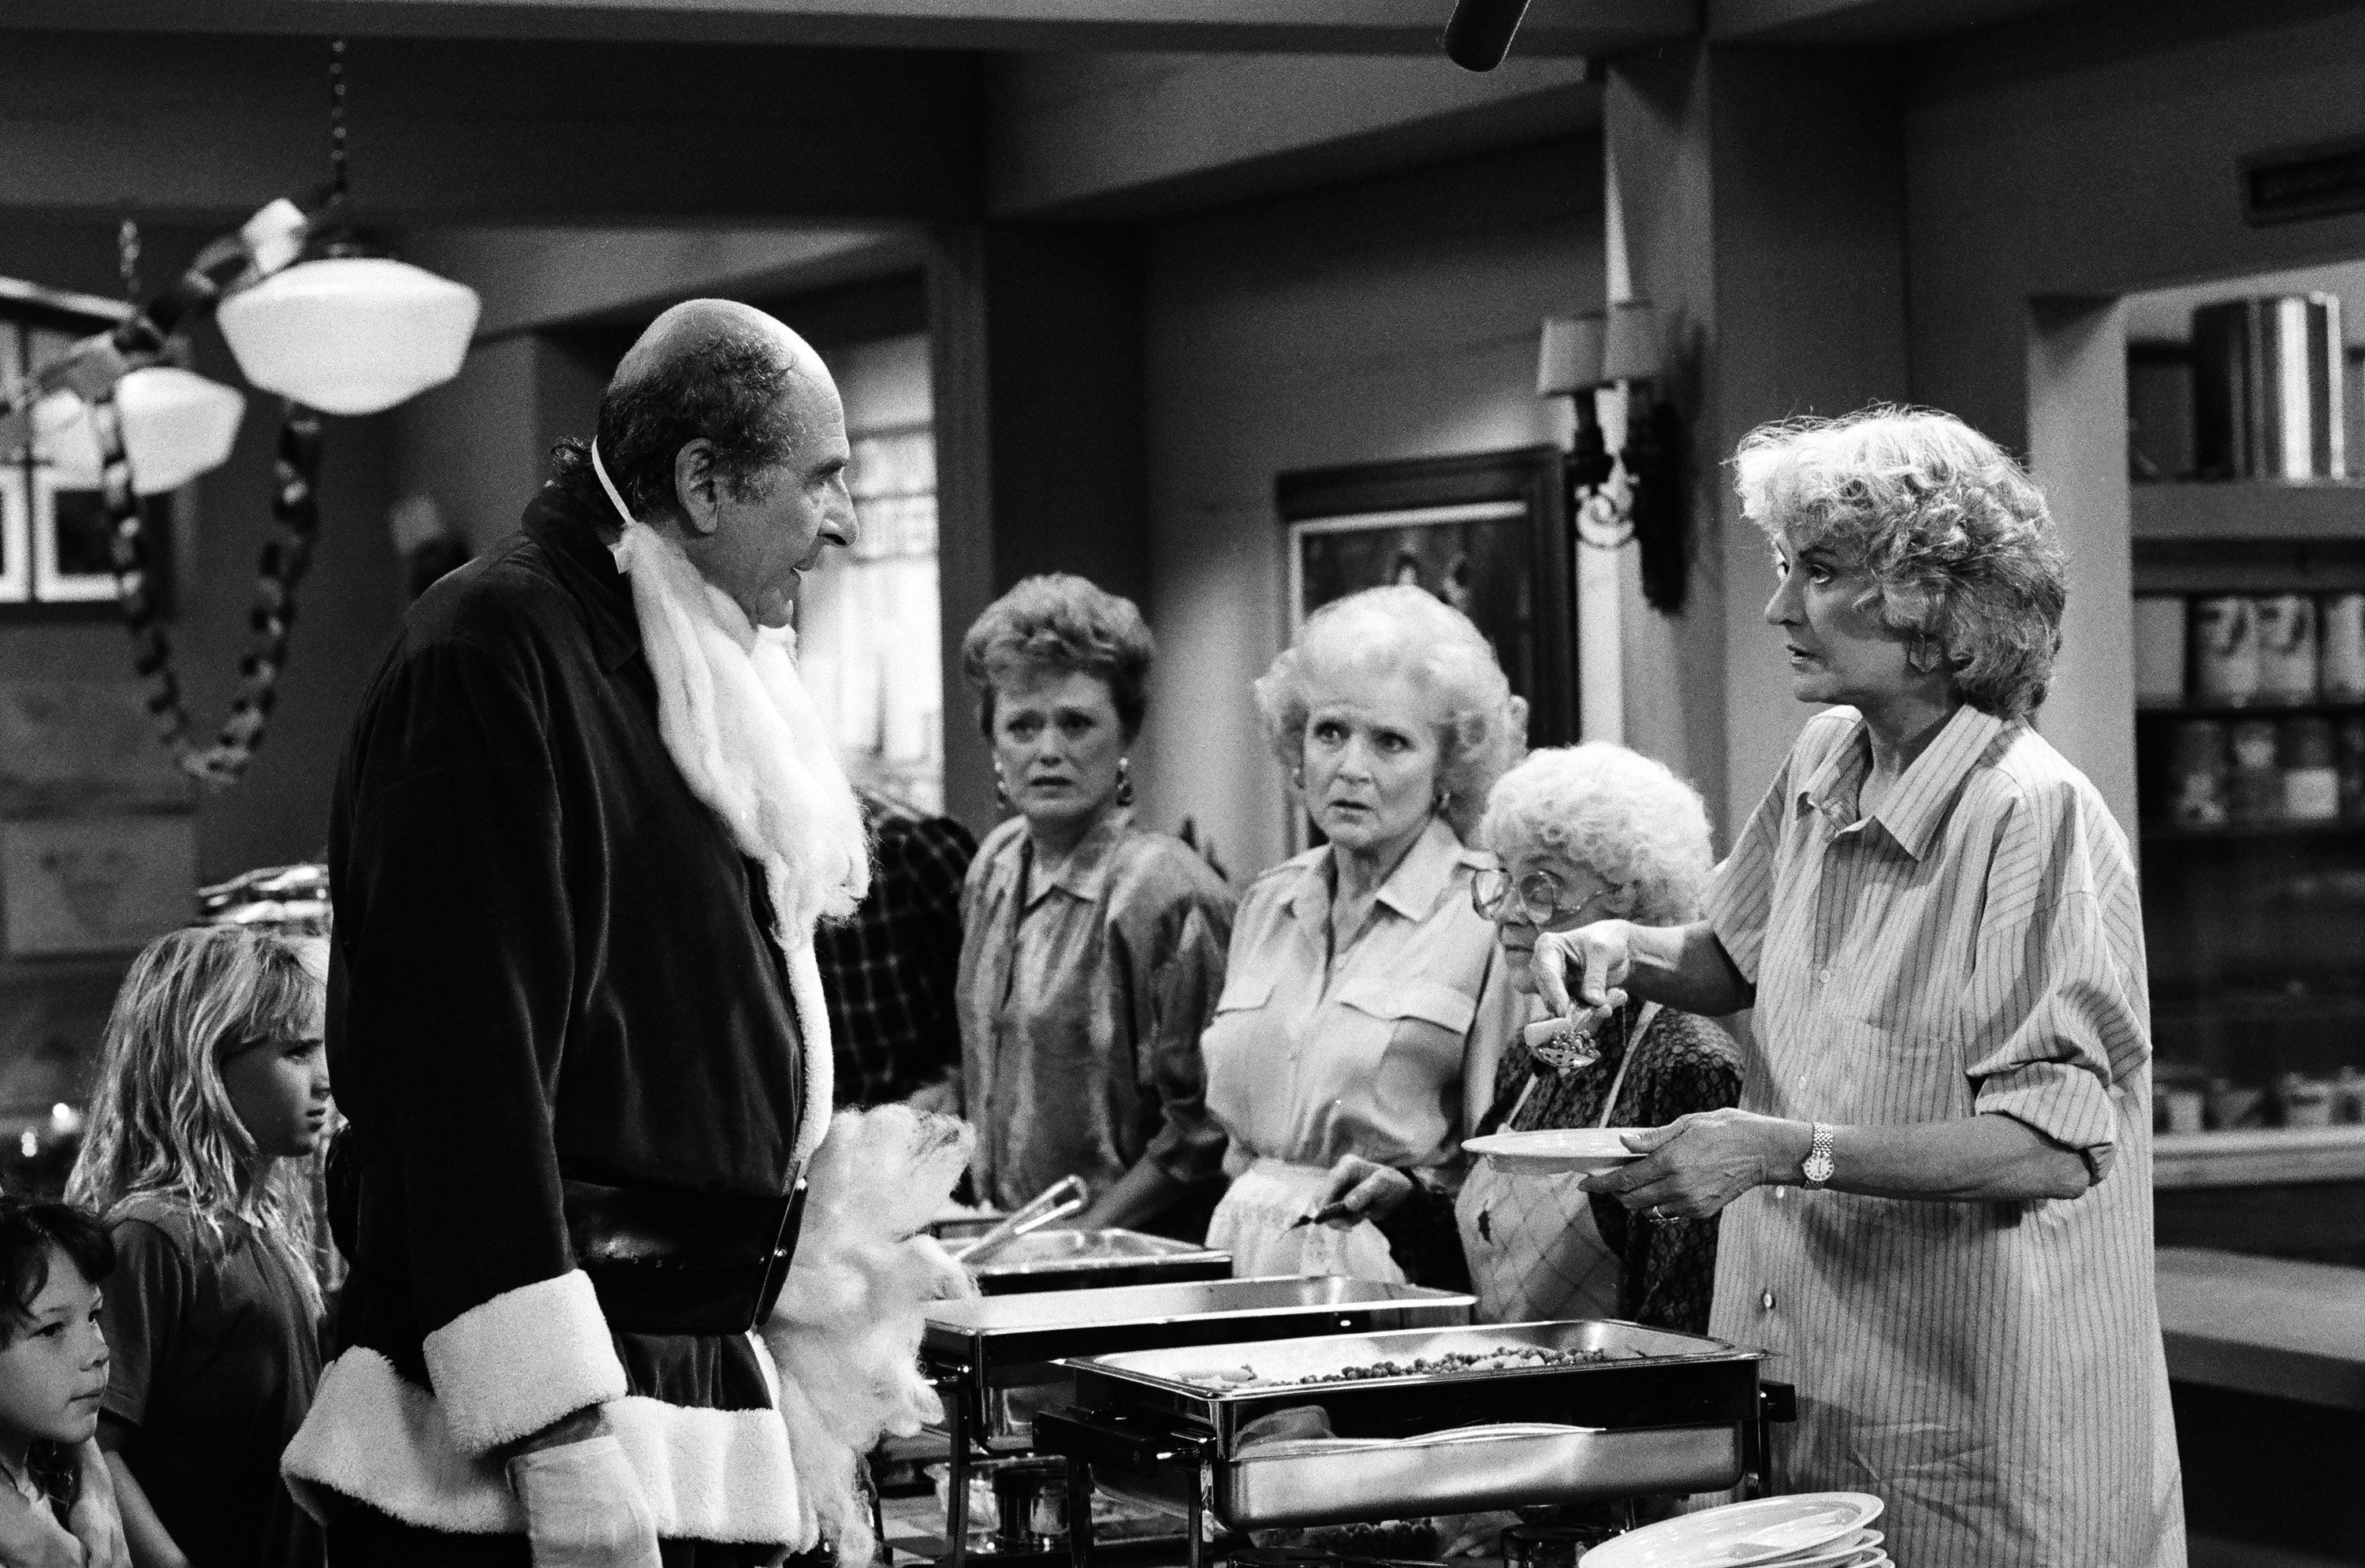 'The Golden Girls' stars Herb Edelman, Rue McClanahan, Betty White, Estelle Getty, and Bea Arthur in a Christmas episode of the series.